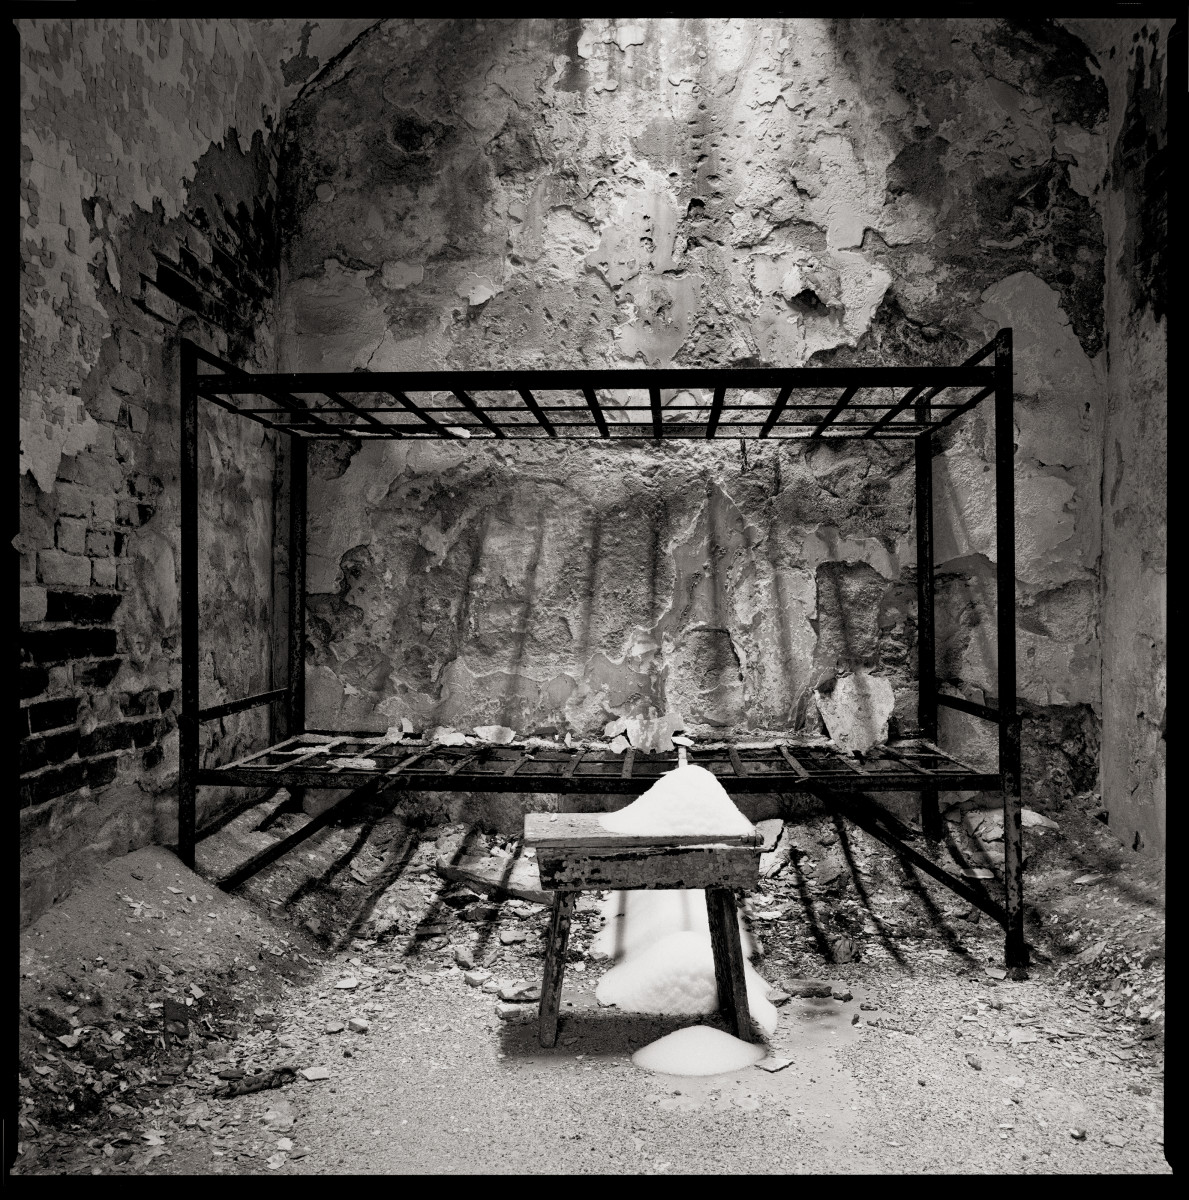 Ashes by Eric T. Kunsman  Image: ID: A black and white image shows a cell room with a bunkbed frame against the back wall.  In front of the bed frame there is a wooden desk that has a pile of ashes on it as well as underneath it.  There are piles of dust and debris on the floor and the plaster has cracked off the brick walls.